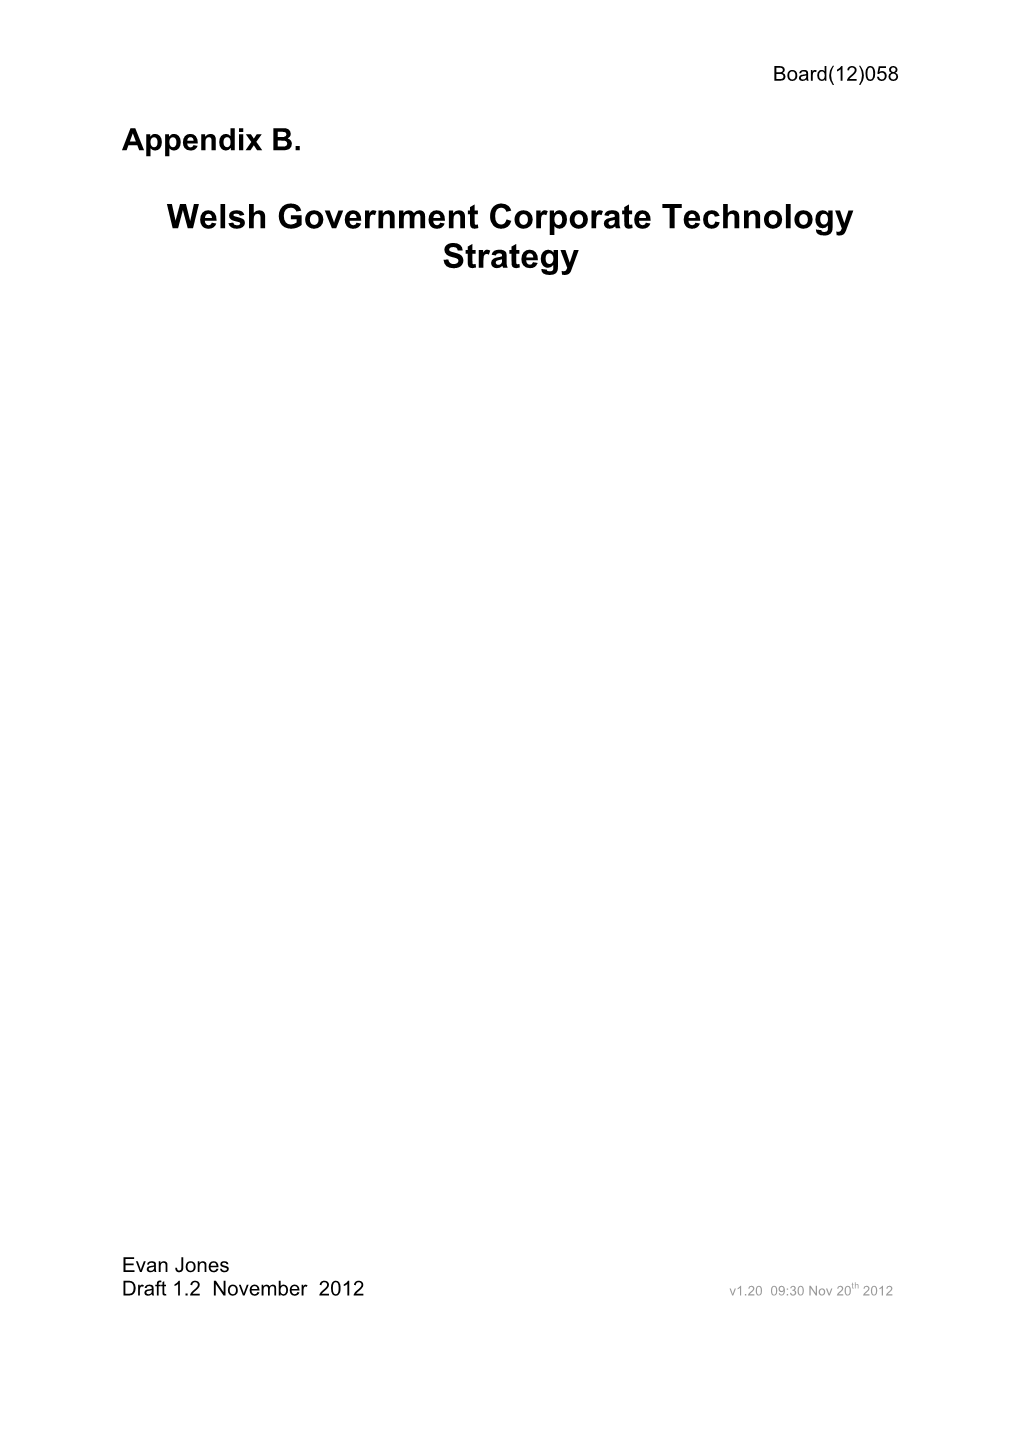 Welsh Government Corporate Technology Strategy